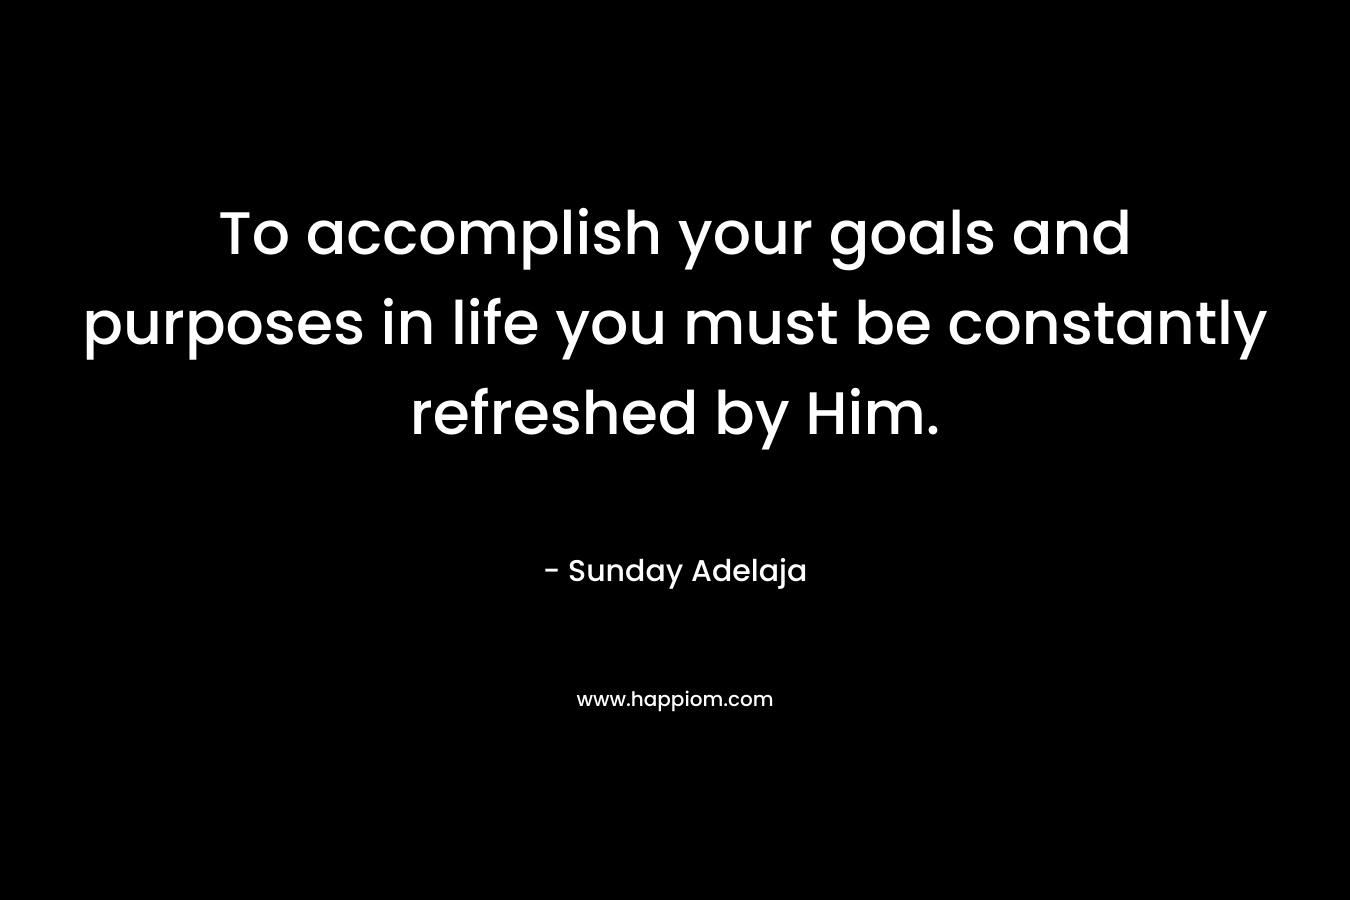 To accomplish your goals and purposes in life you must be constantly refreshed by Him. – Sunday Adelaja